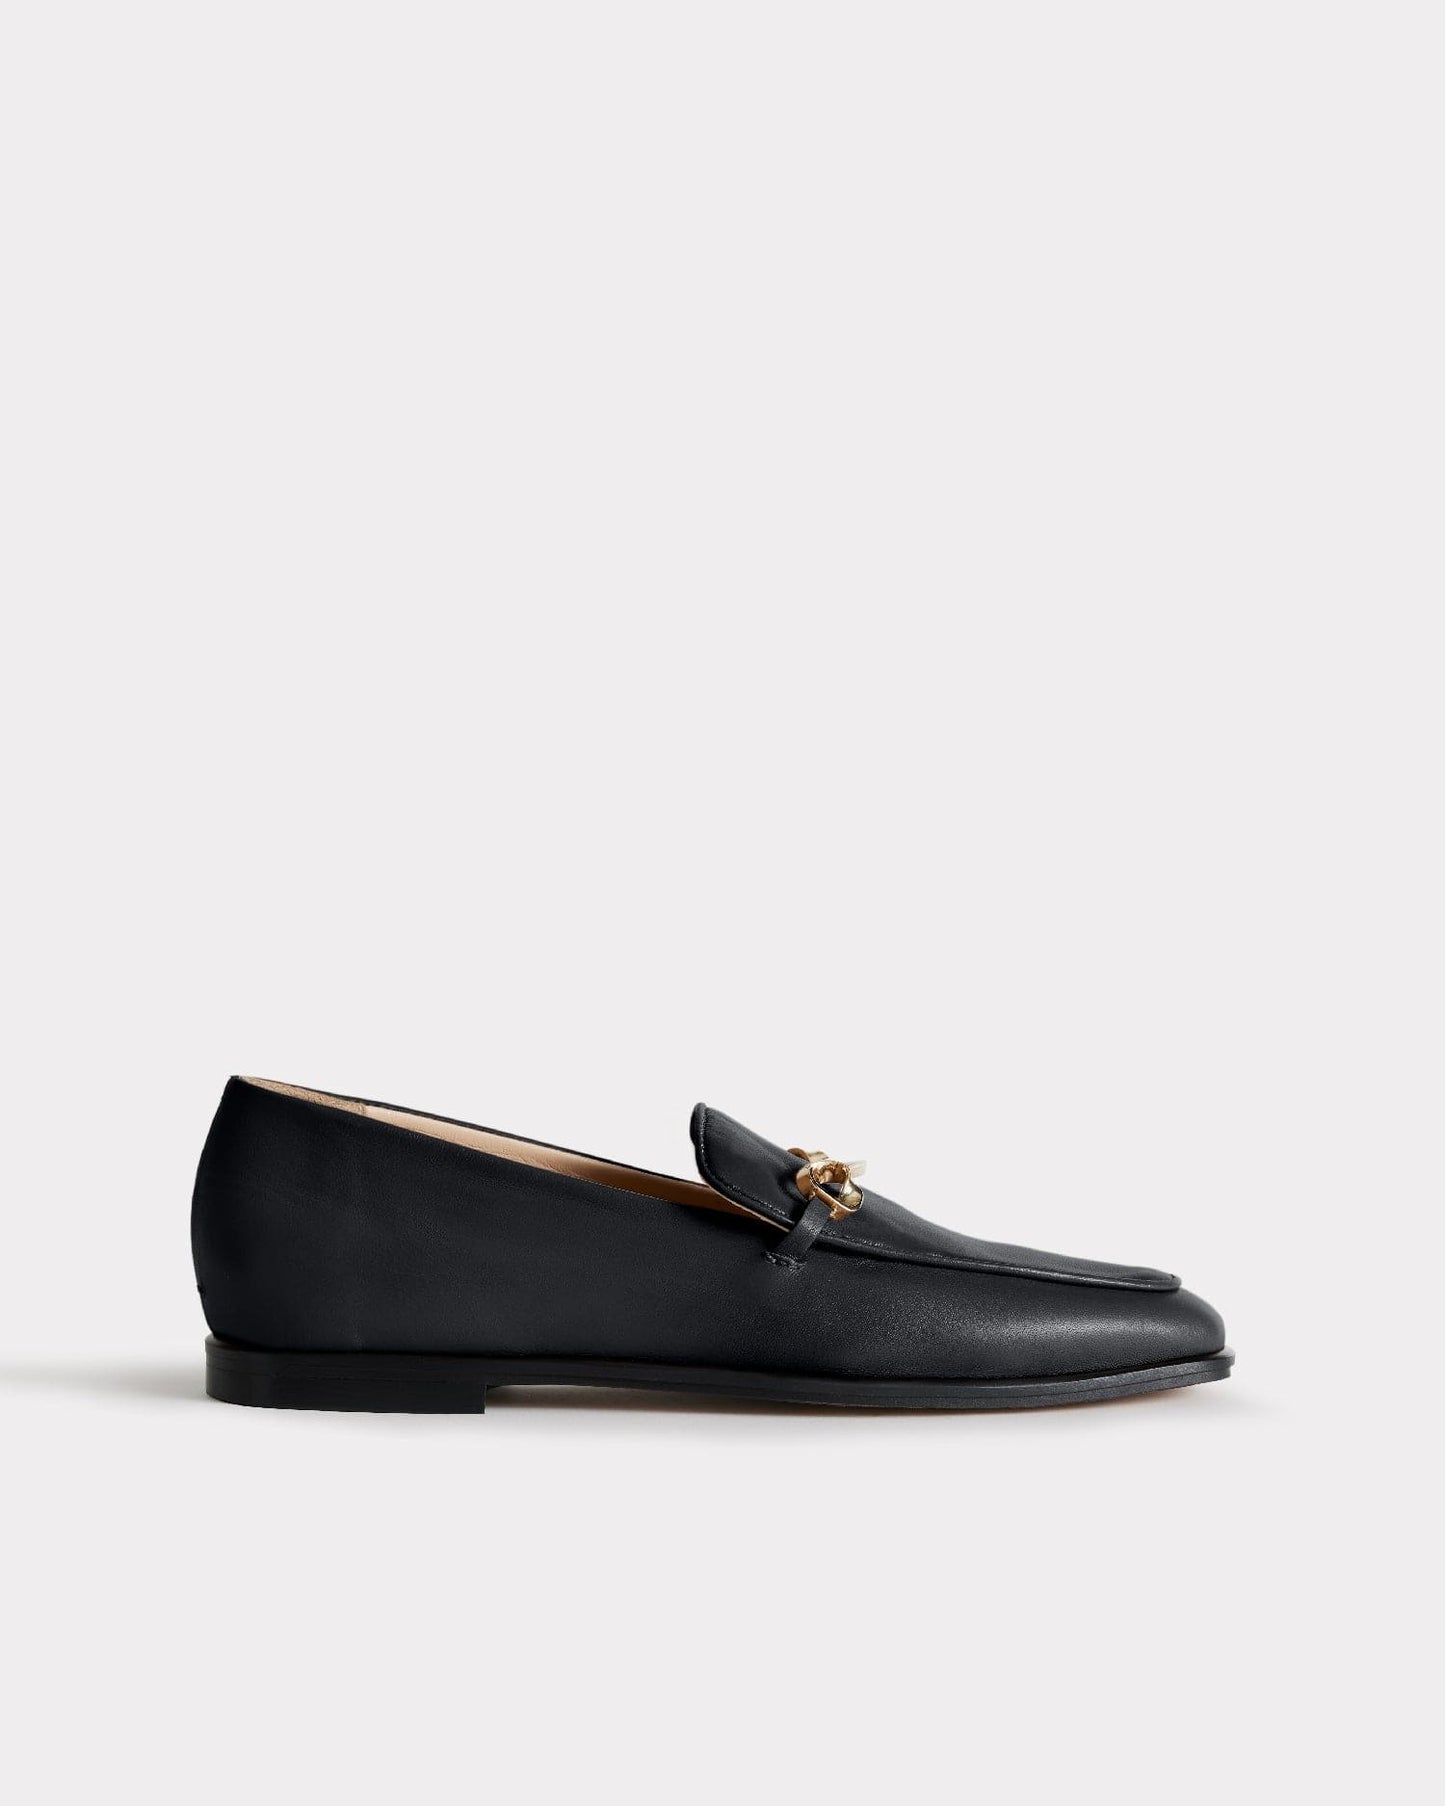 The Modern Moccasin - Black with hardware